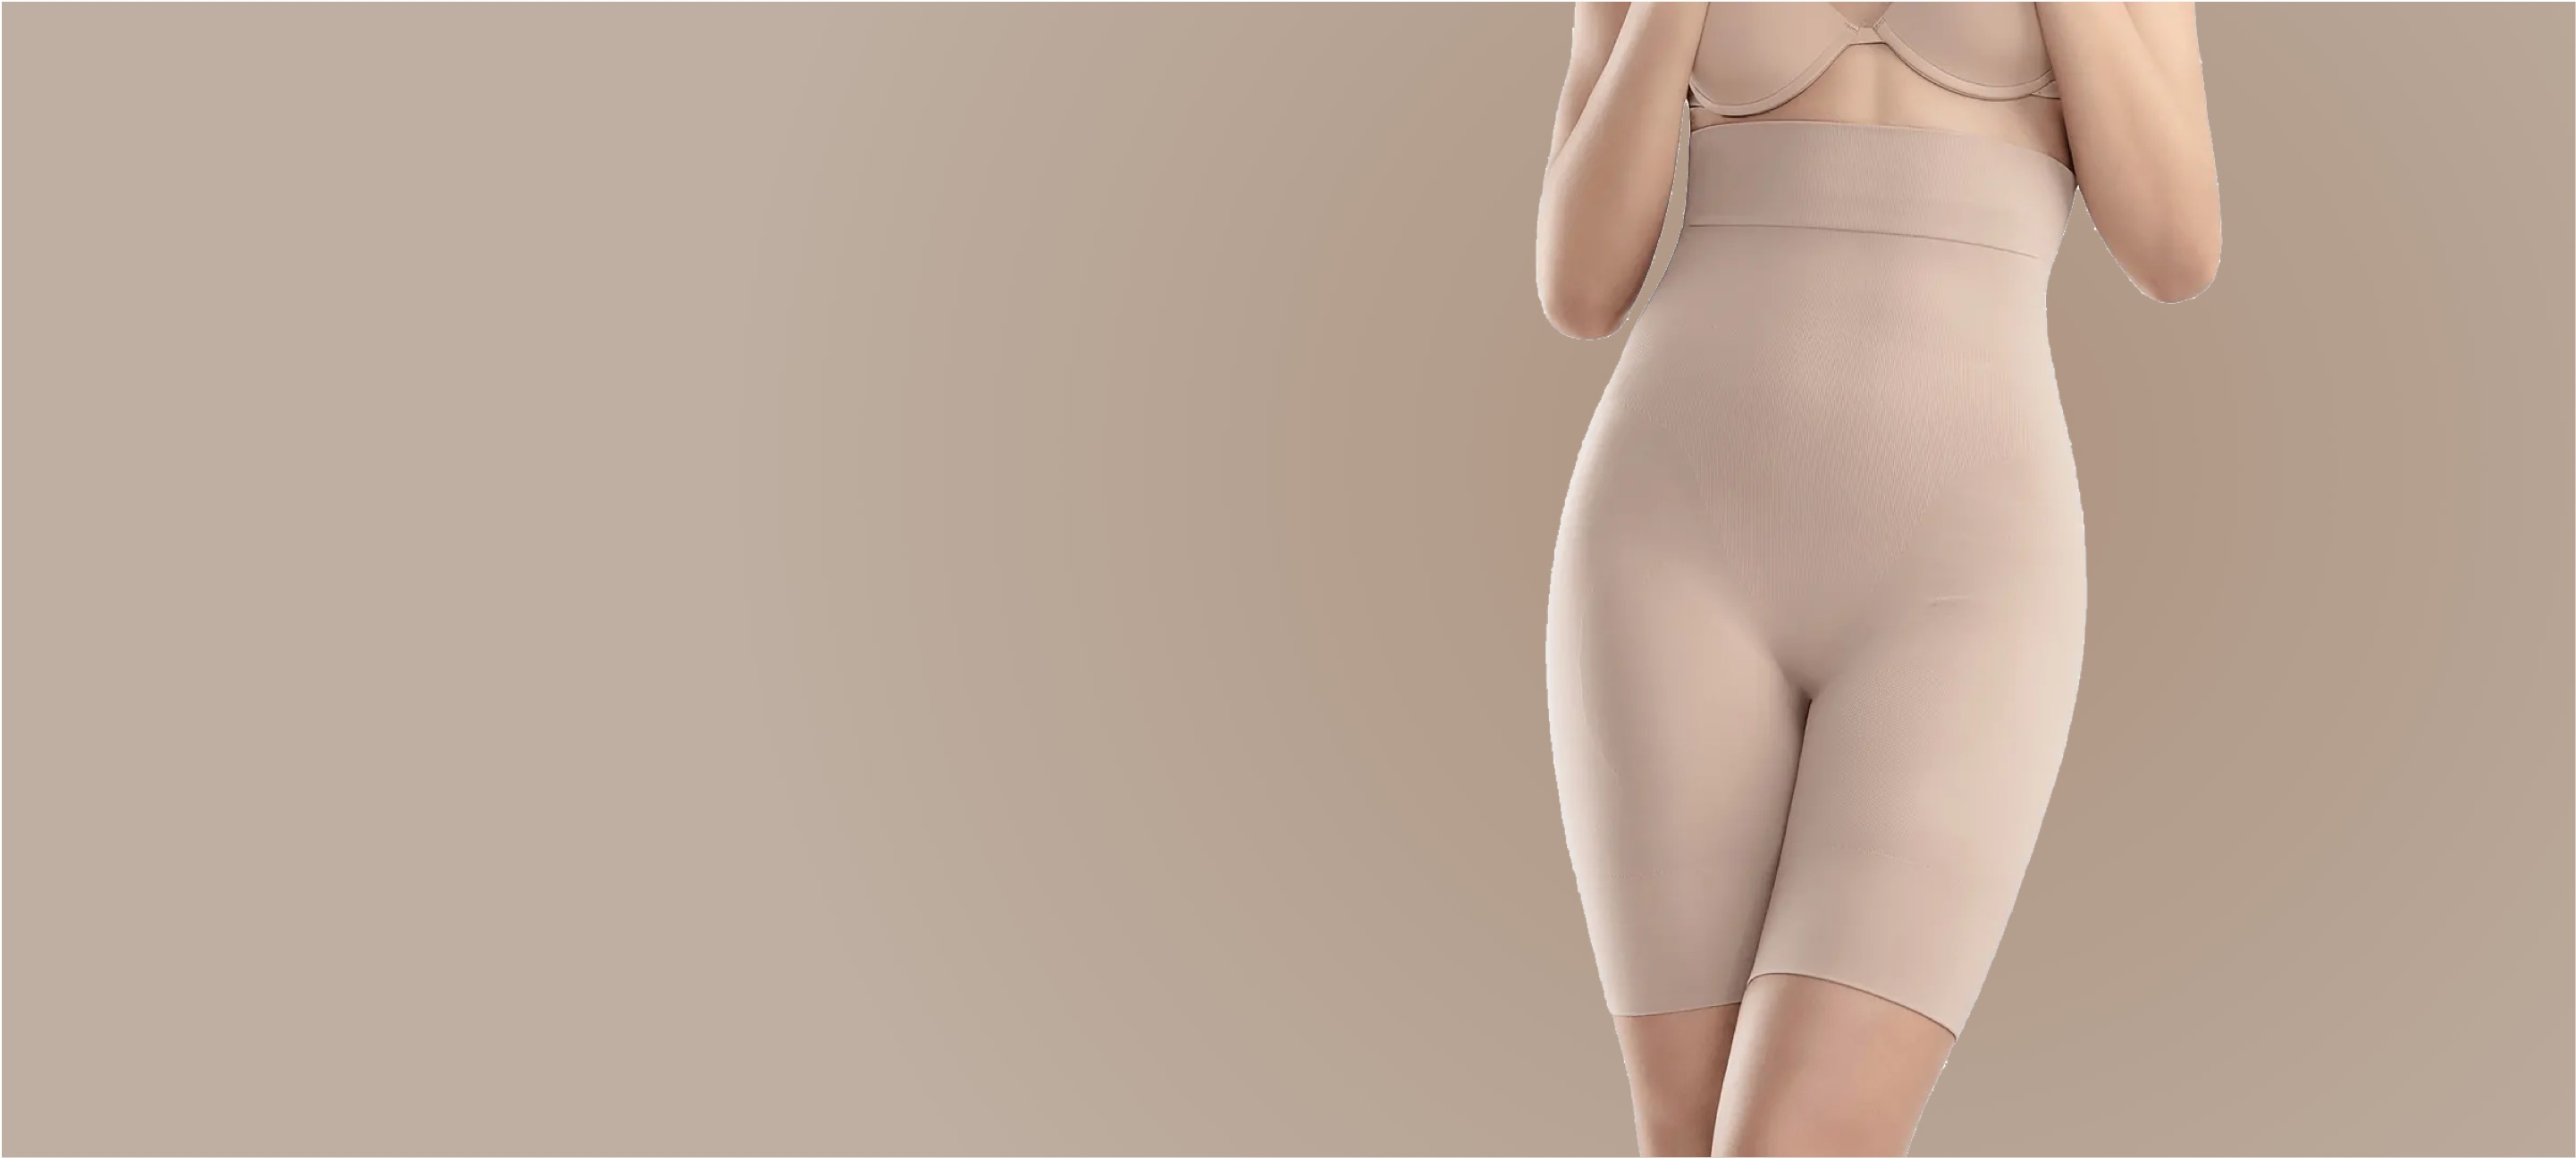 Farmacell Bodyshaper 603y - Innergy Anticellulite Shorts With Fir Slimming  Effect at Rs 2118/piece, SHAPERS in Thane